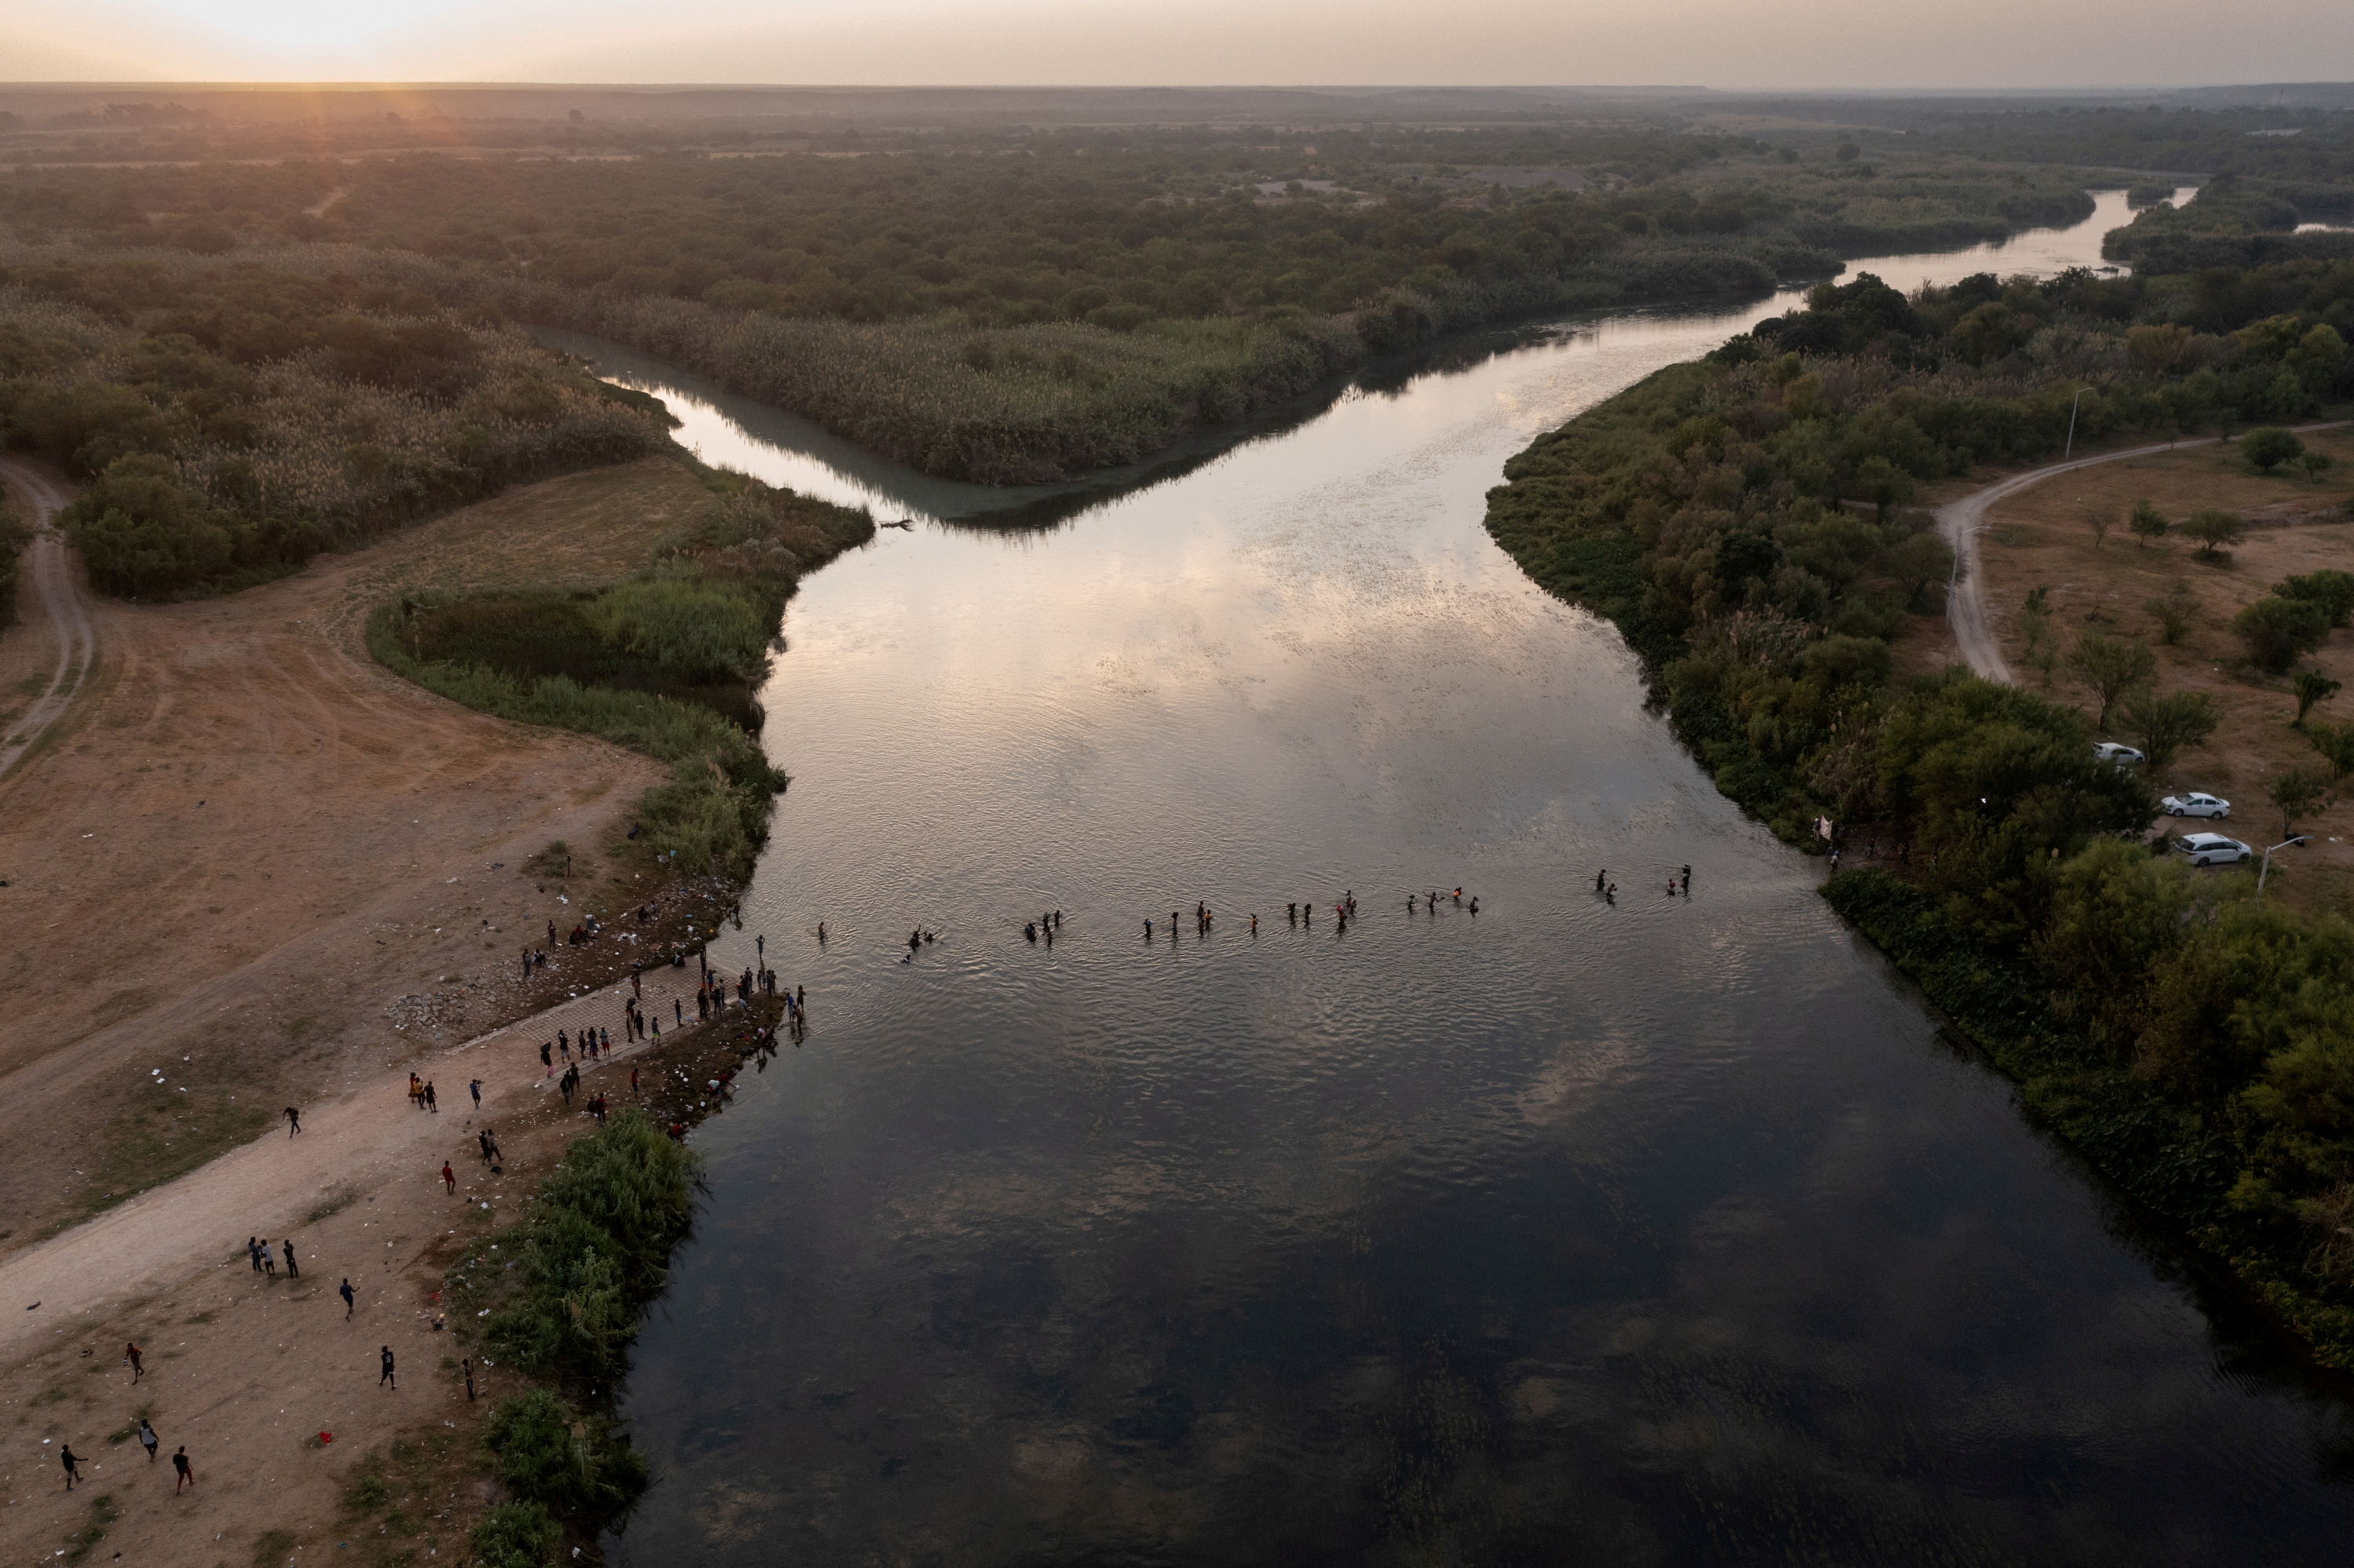 Migrants seeking refuge in United States cross the Rio Grande river, with bags and children in tow, back into Ciudad Acuna, Mexico from their camp in Del Rio, Texas, U.S. September 21, 2021. Picture taken with a drone. REUTERS/Adrees Latif//File Photo